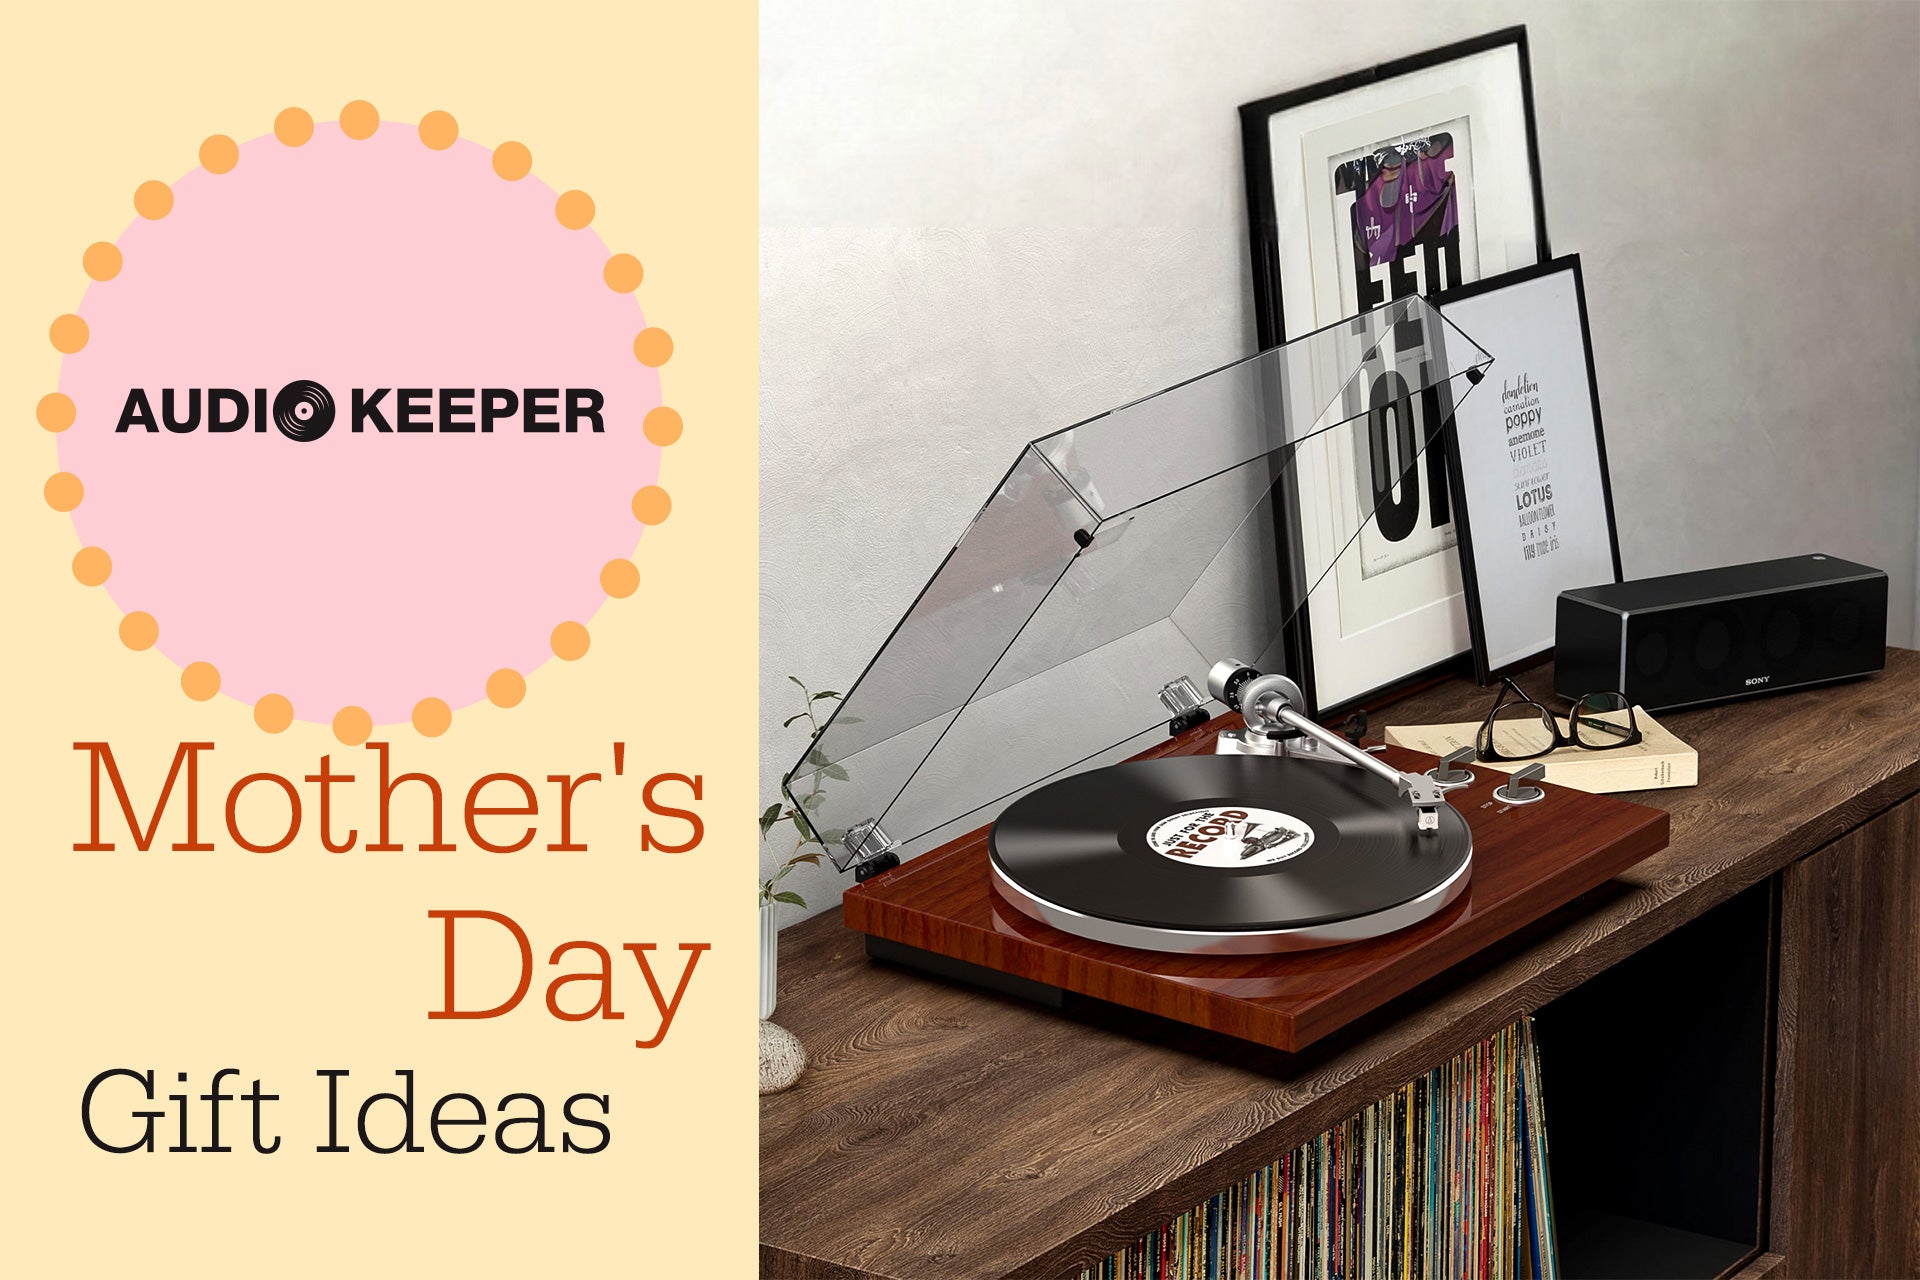 Sound of Records: The Perfect Way to Create a Unique Mother’s Day Gift